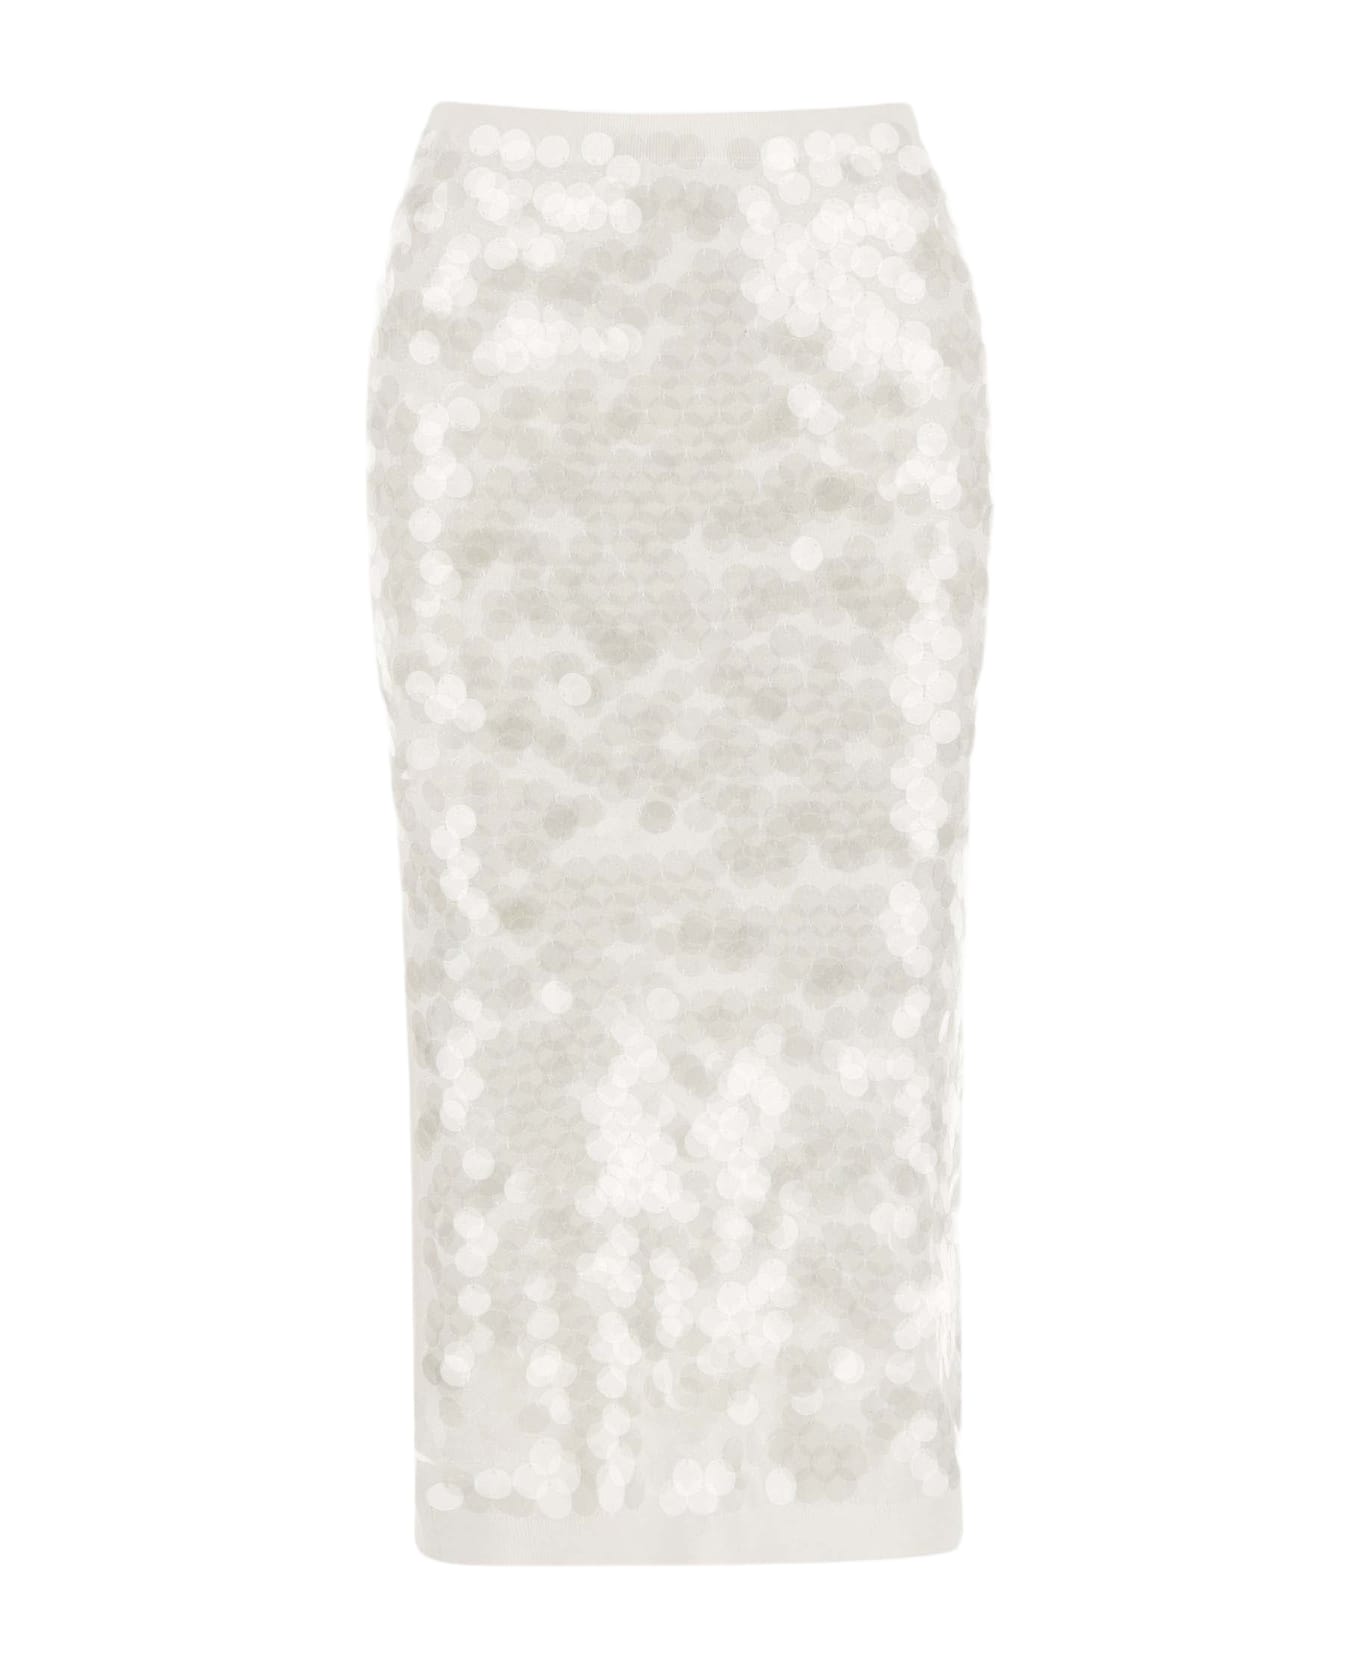 N.21 Sequined Cotton Skirt - White